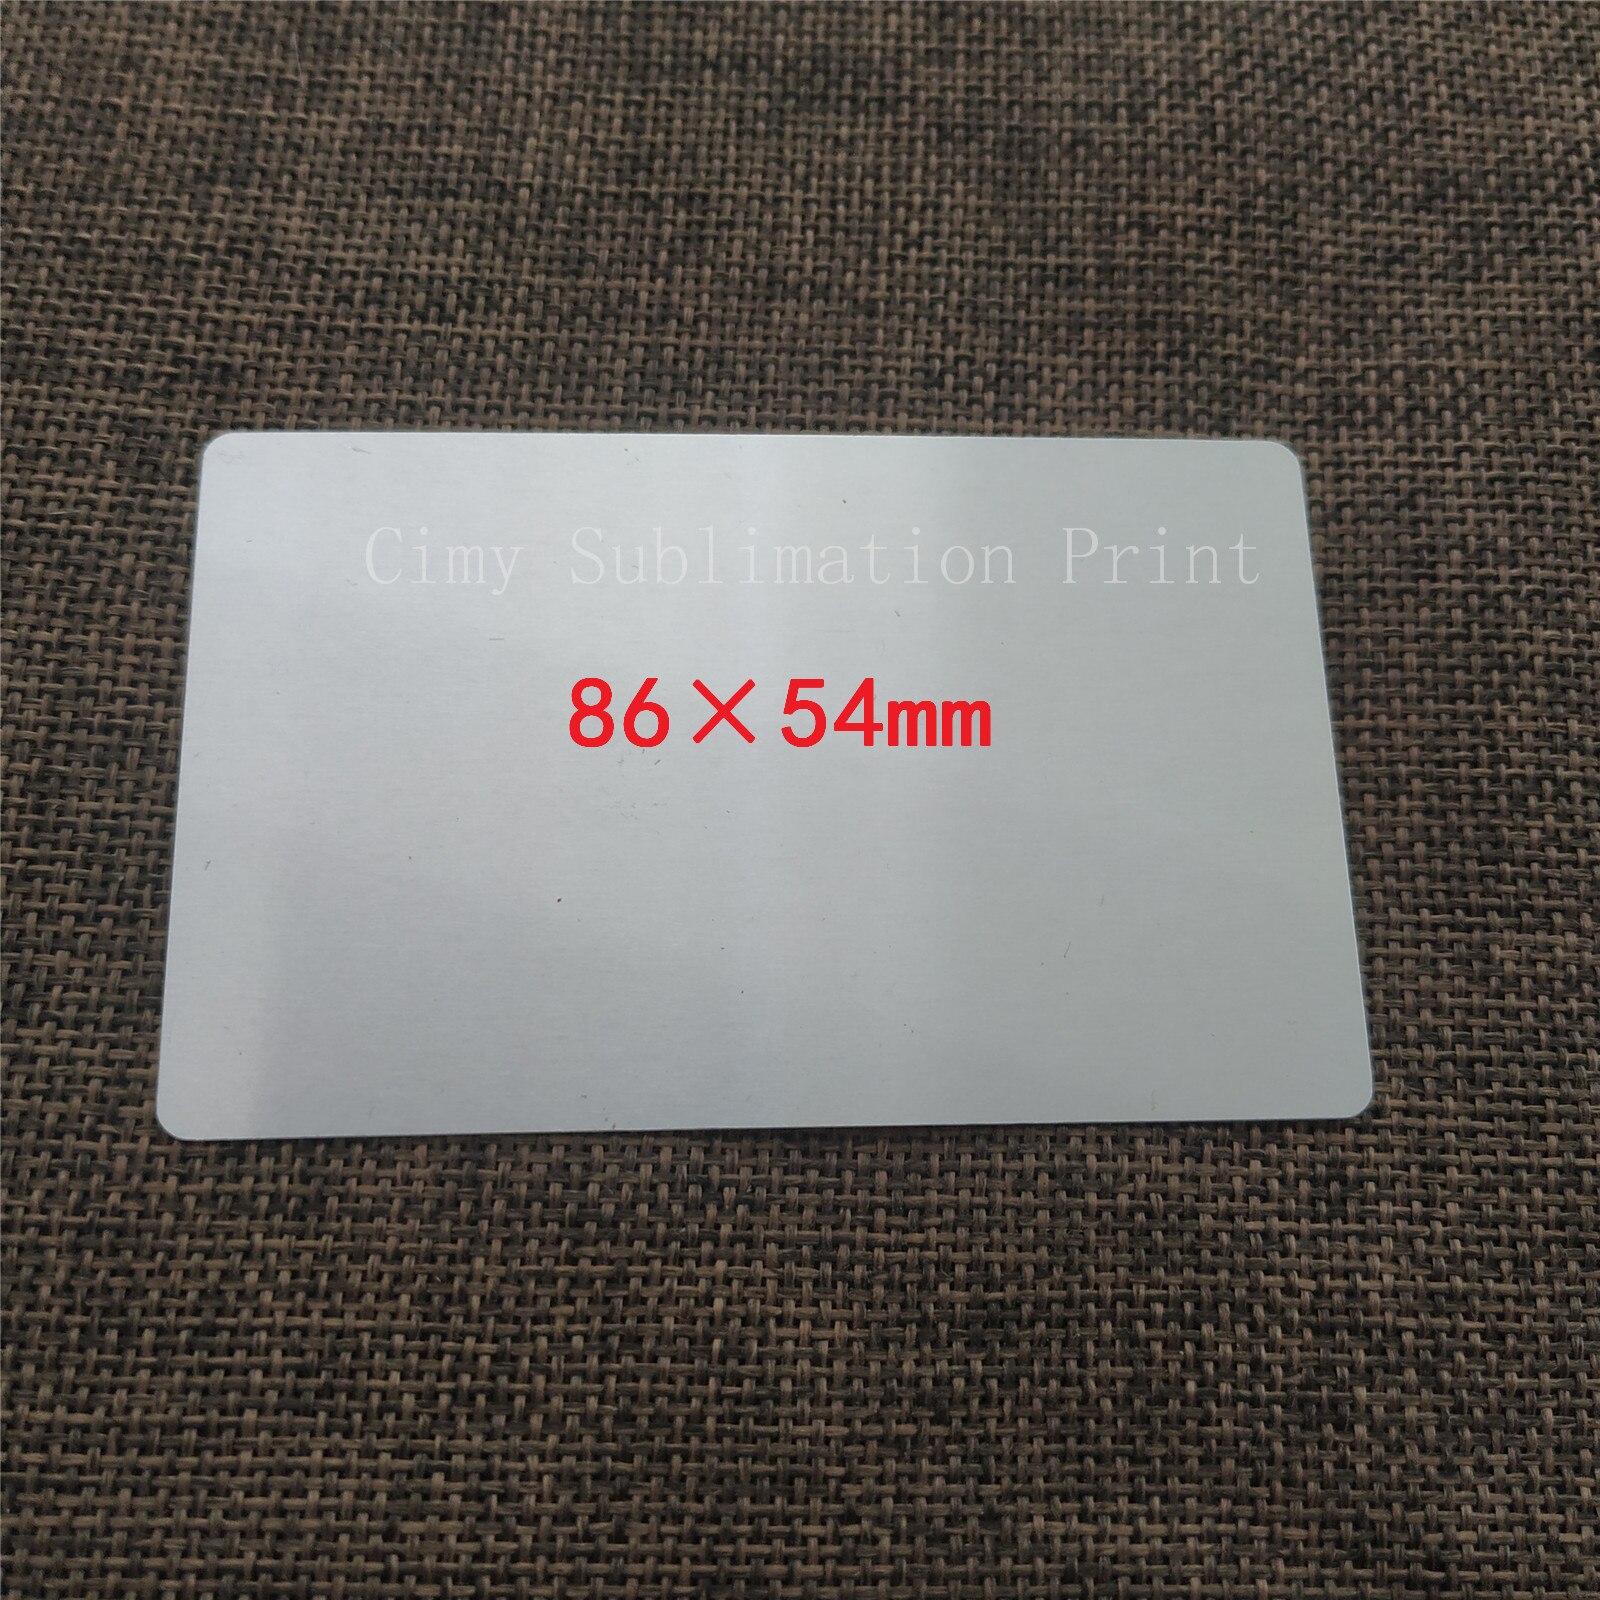 100sheets 0.45mm 86*54mm Blank Sublimation Metal Plate Aluminium sheet Name Card Printing Sublimation Ink Transfer DIY Craft: Silver